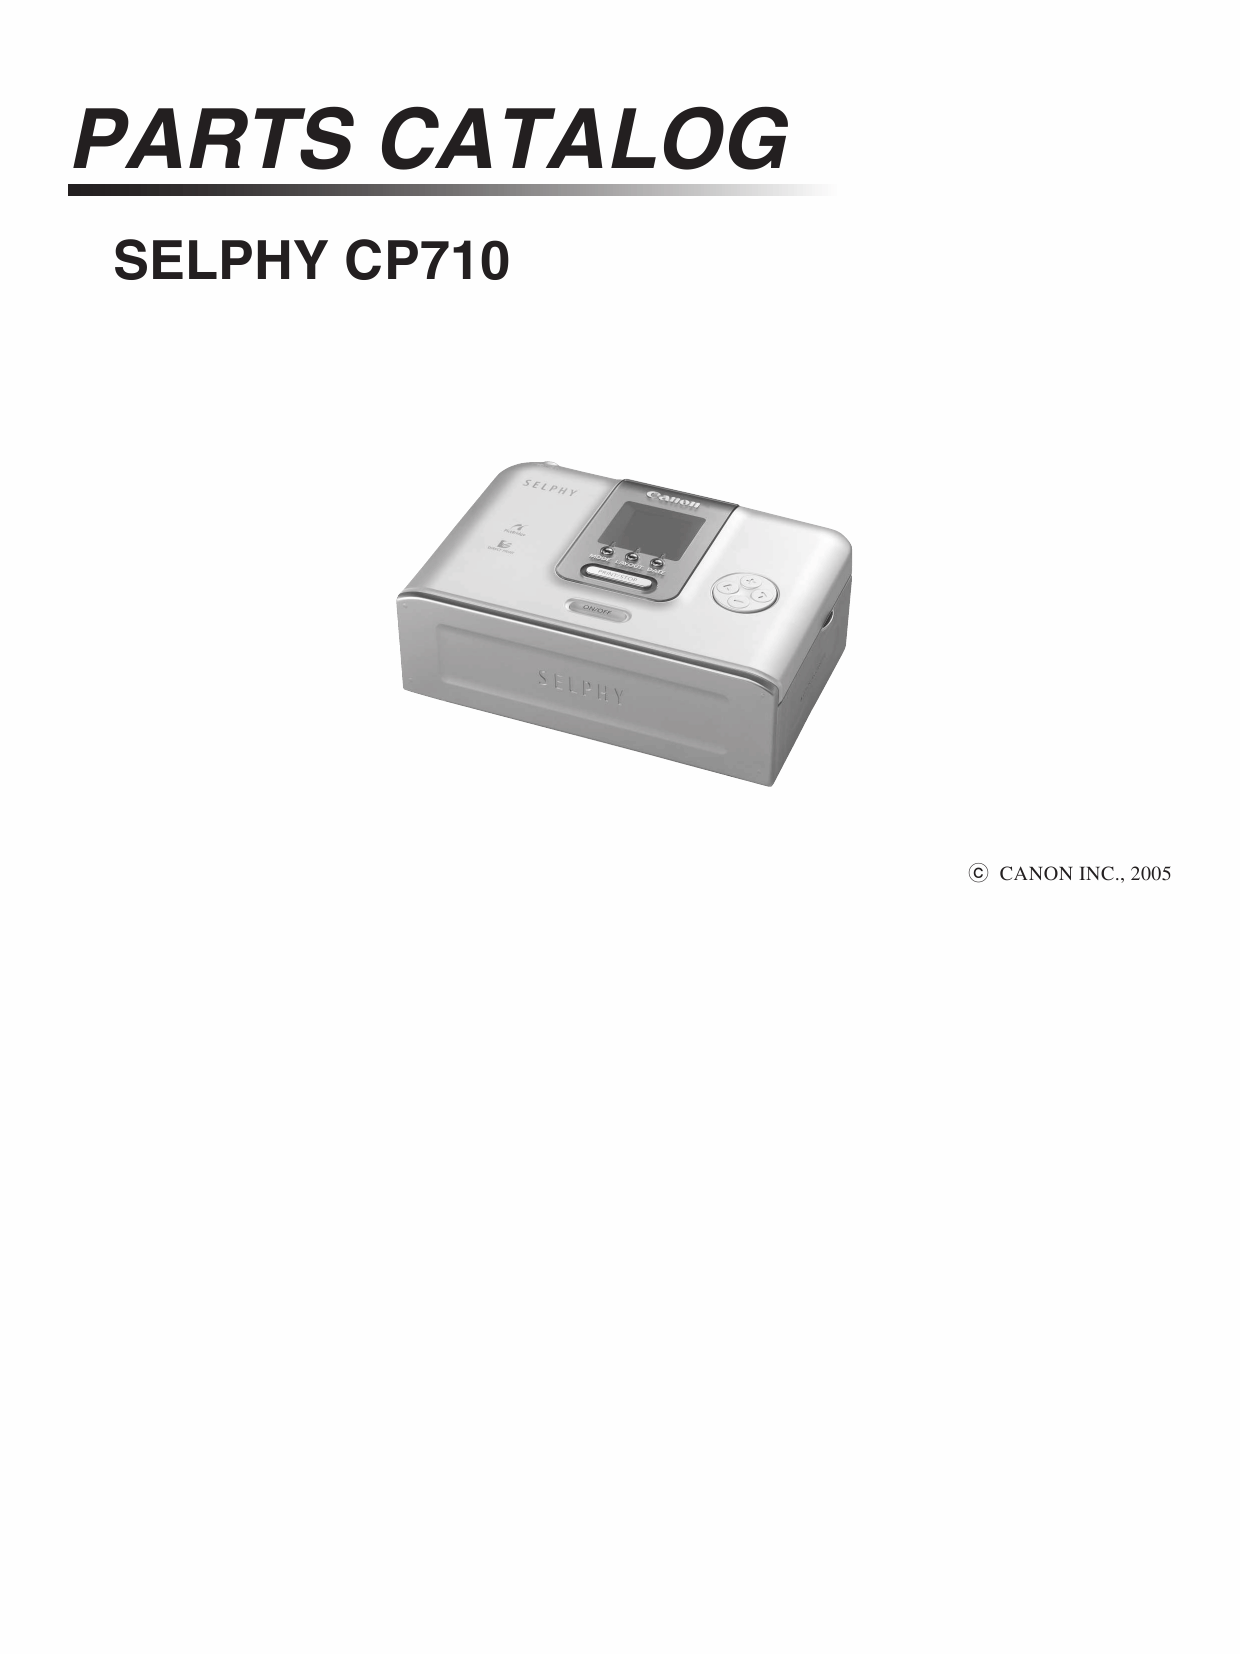 Canon SELPHY CP710 Parts Catalog Manual-1